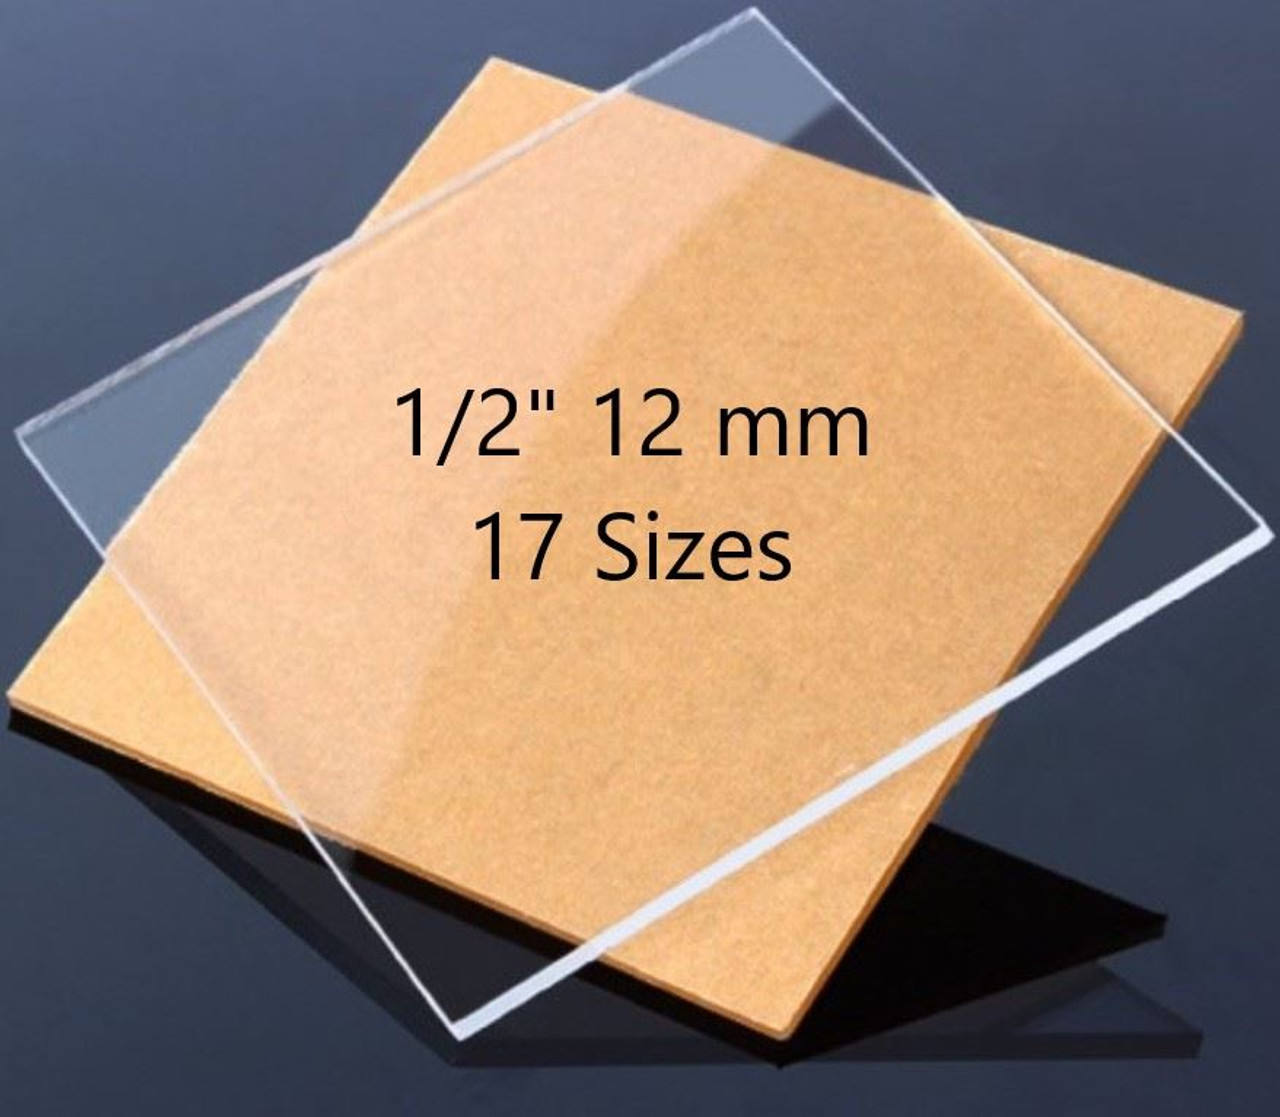 12 x 12 Craft Plastic Acrylic Sheet Packs for Laser Cutter - White